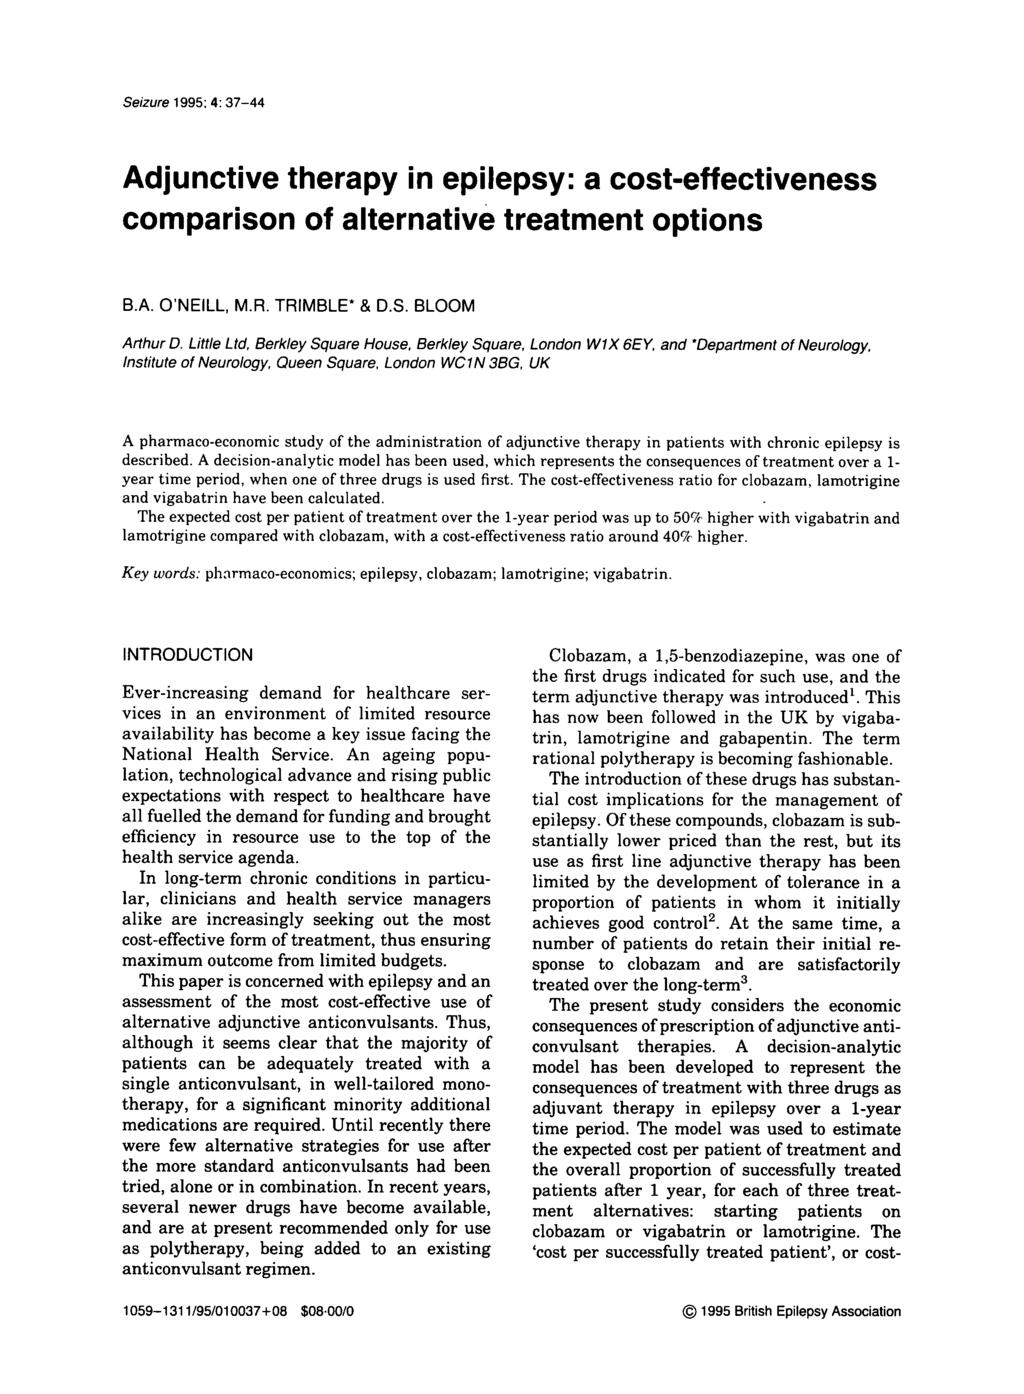 Seizure 1995: 4:37-44 Adjunctive therapy in epilepsy: a cost-effectiveness comparison of alternative treatment options B.A. O'NEILL, M.R. TRIMBLE* & D.S. BLOOM Arthur D.